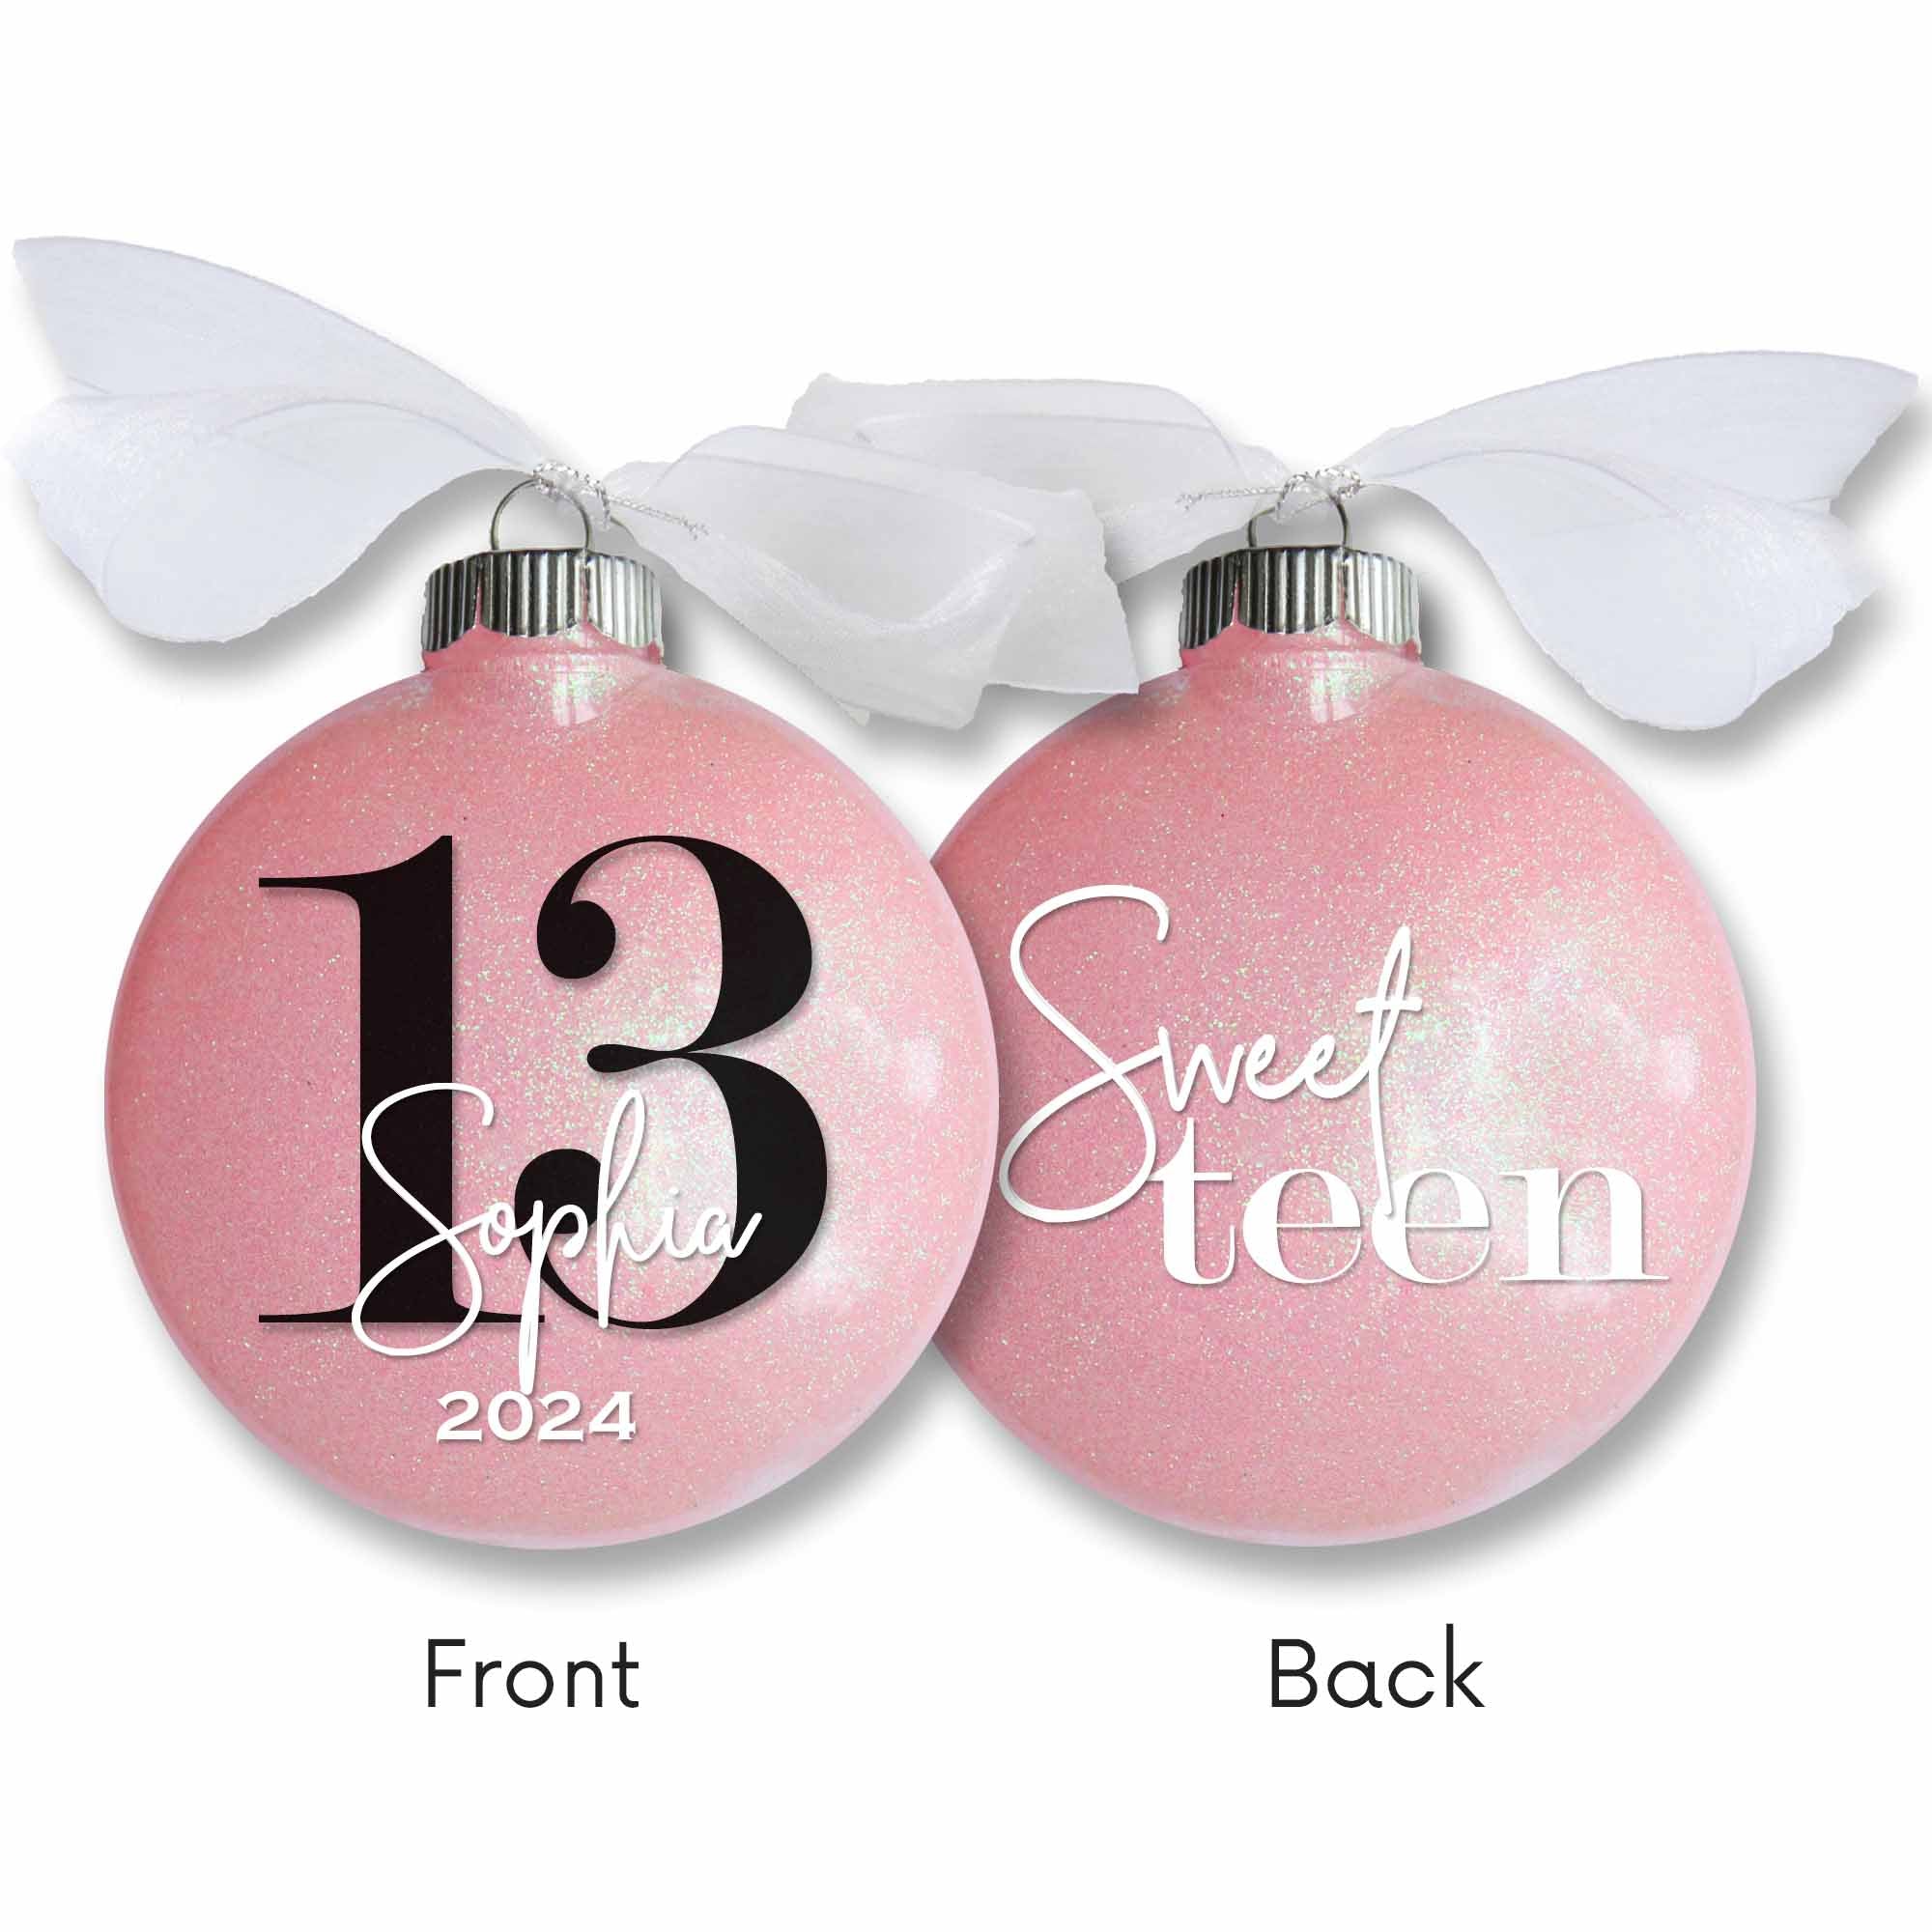 13th Birthday sweet teen light pink glitter Christmas ornament, showing both front and back. Personalized on the front with name and year, and "sweet teen" on the back